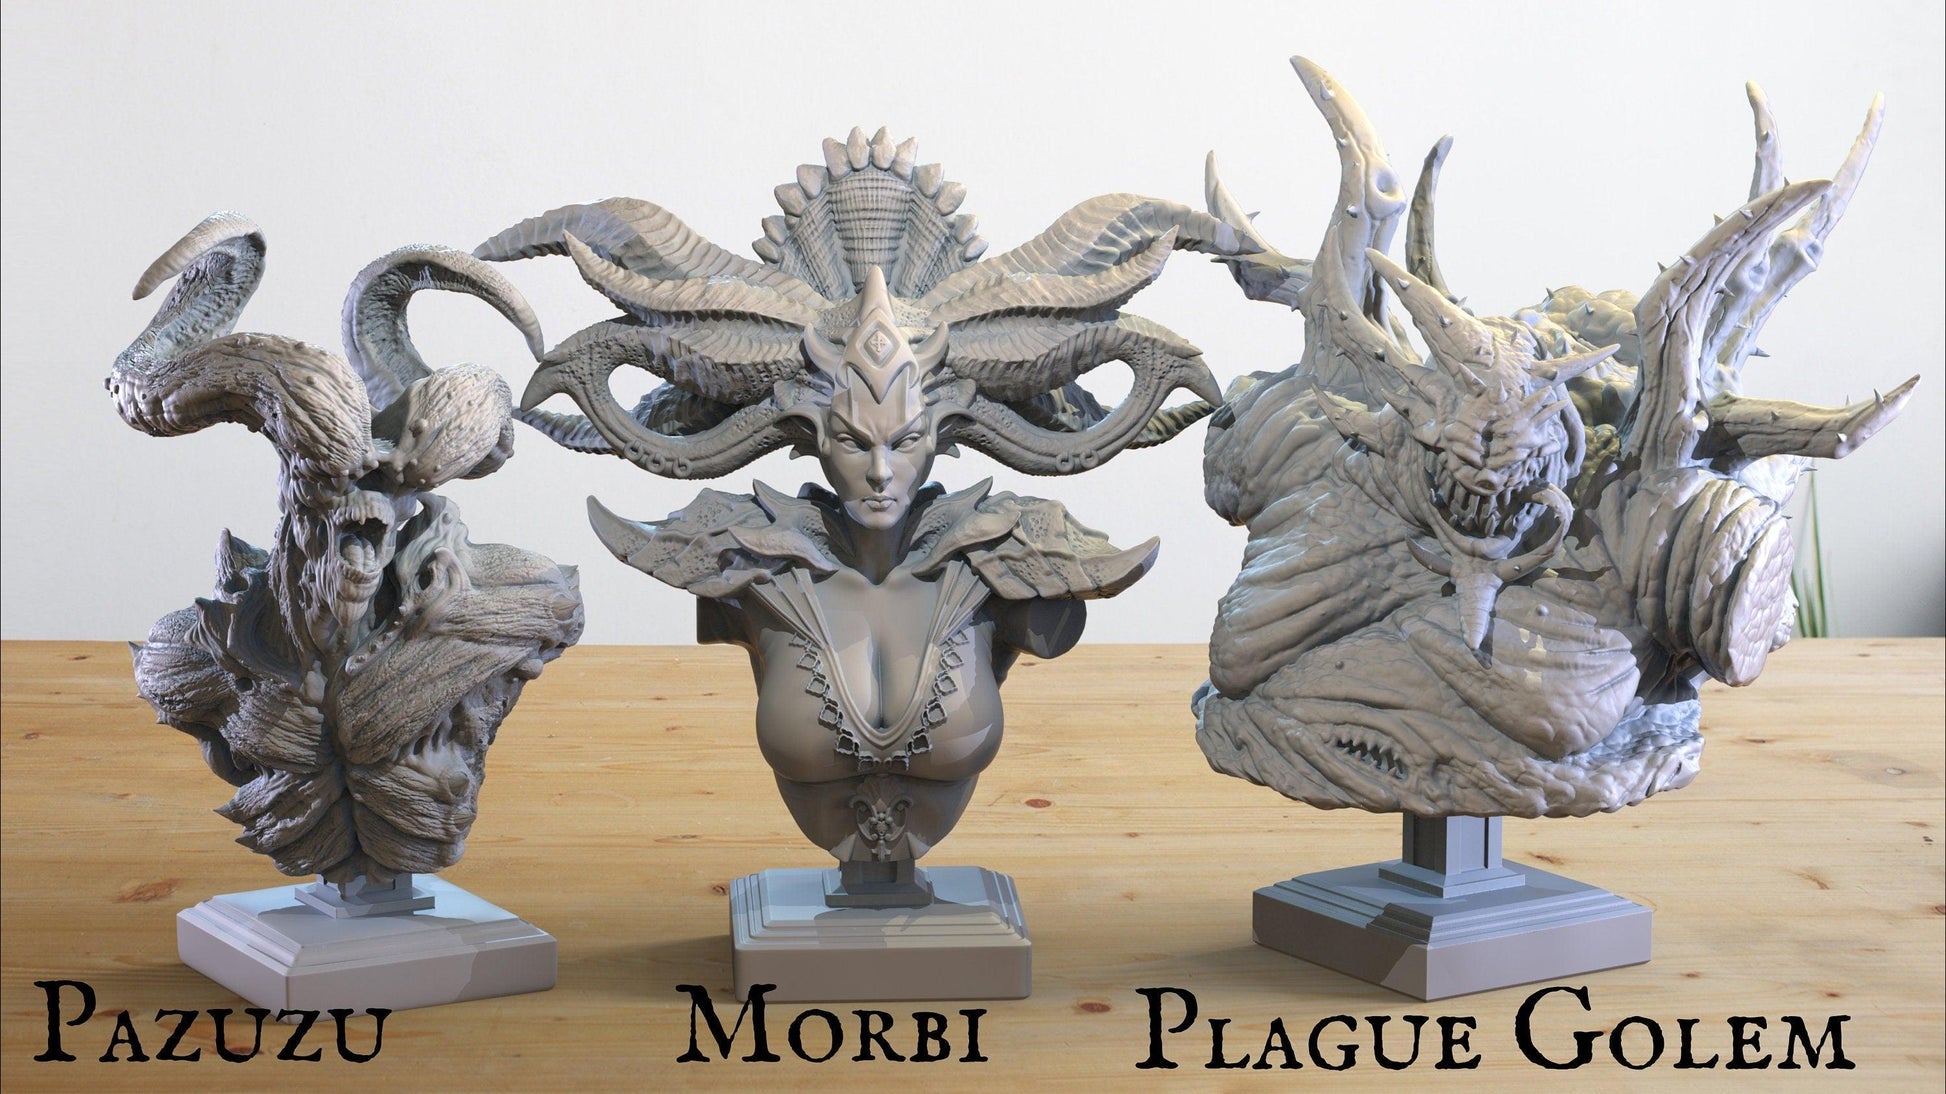 Huge Bust of Morbi | Clay Cyanide | Wrath of God | Showcase | Tabletop Gaming | Resin Bust | Dungeons and Dragons resin scuplture - Plague Miniatures shop for DnD Miniatures